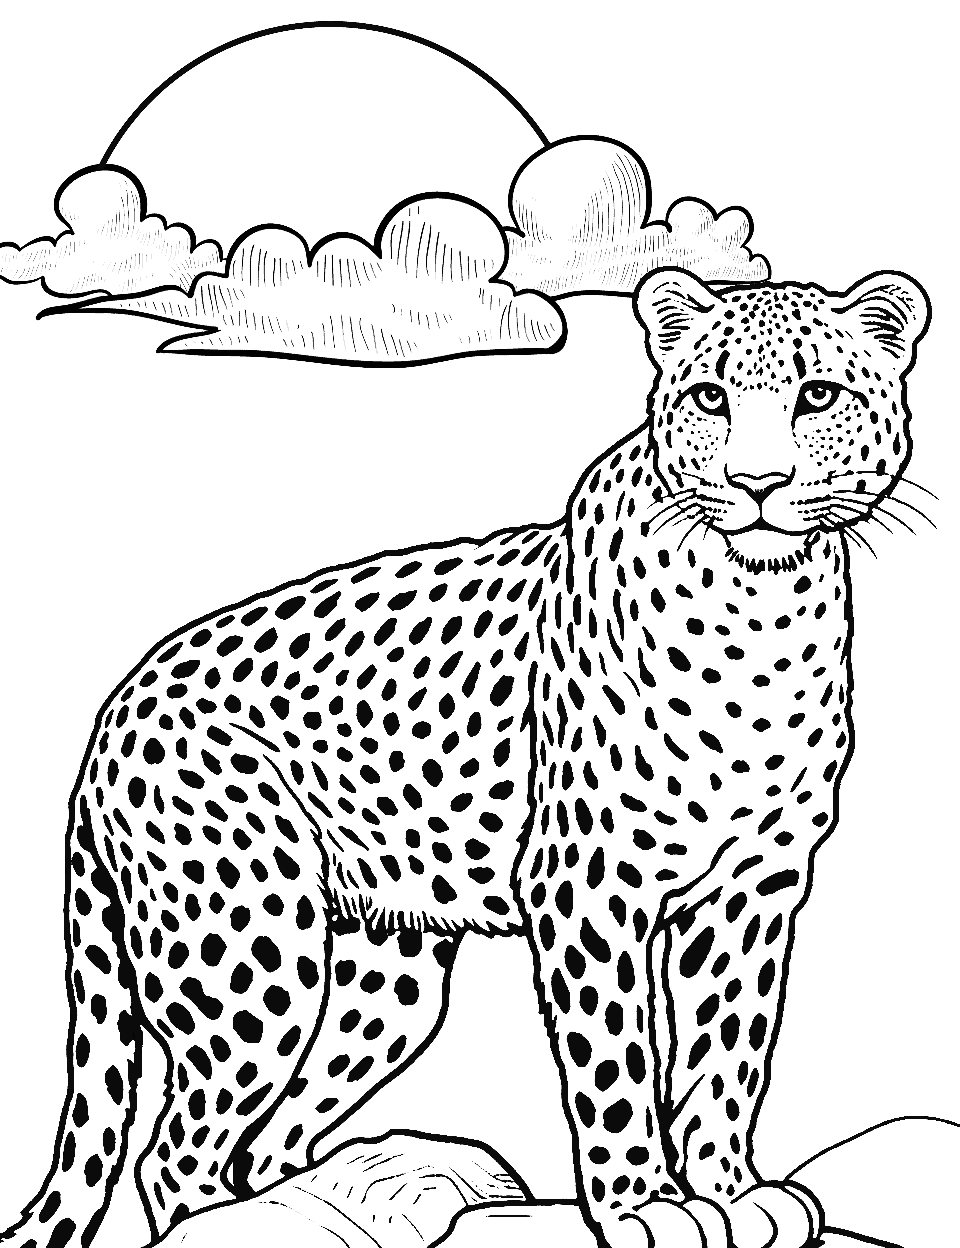 Cheetah on a Hill at Sunrise Coloring Page - A serene scene of a cheetah on a hill, with the sunrise in the background.